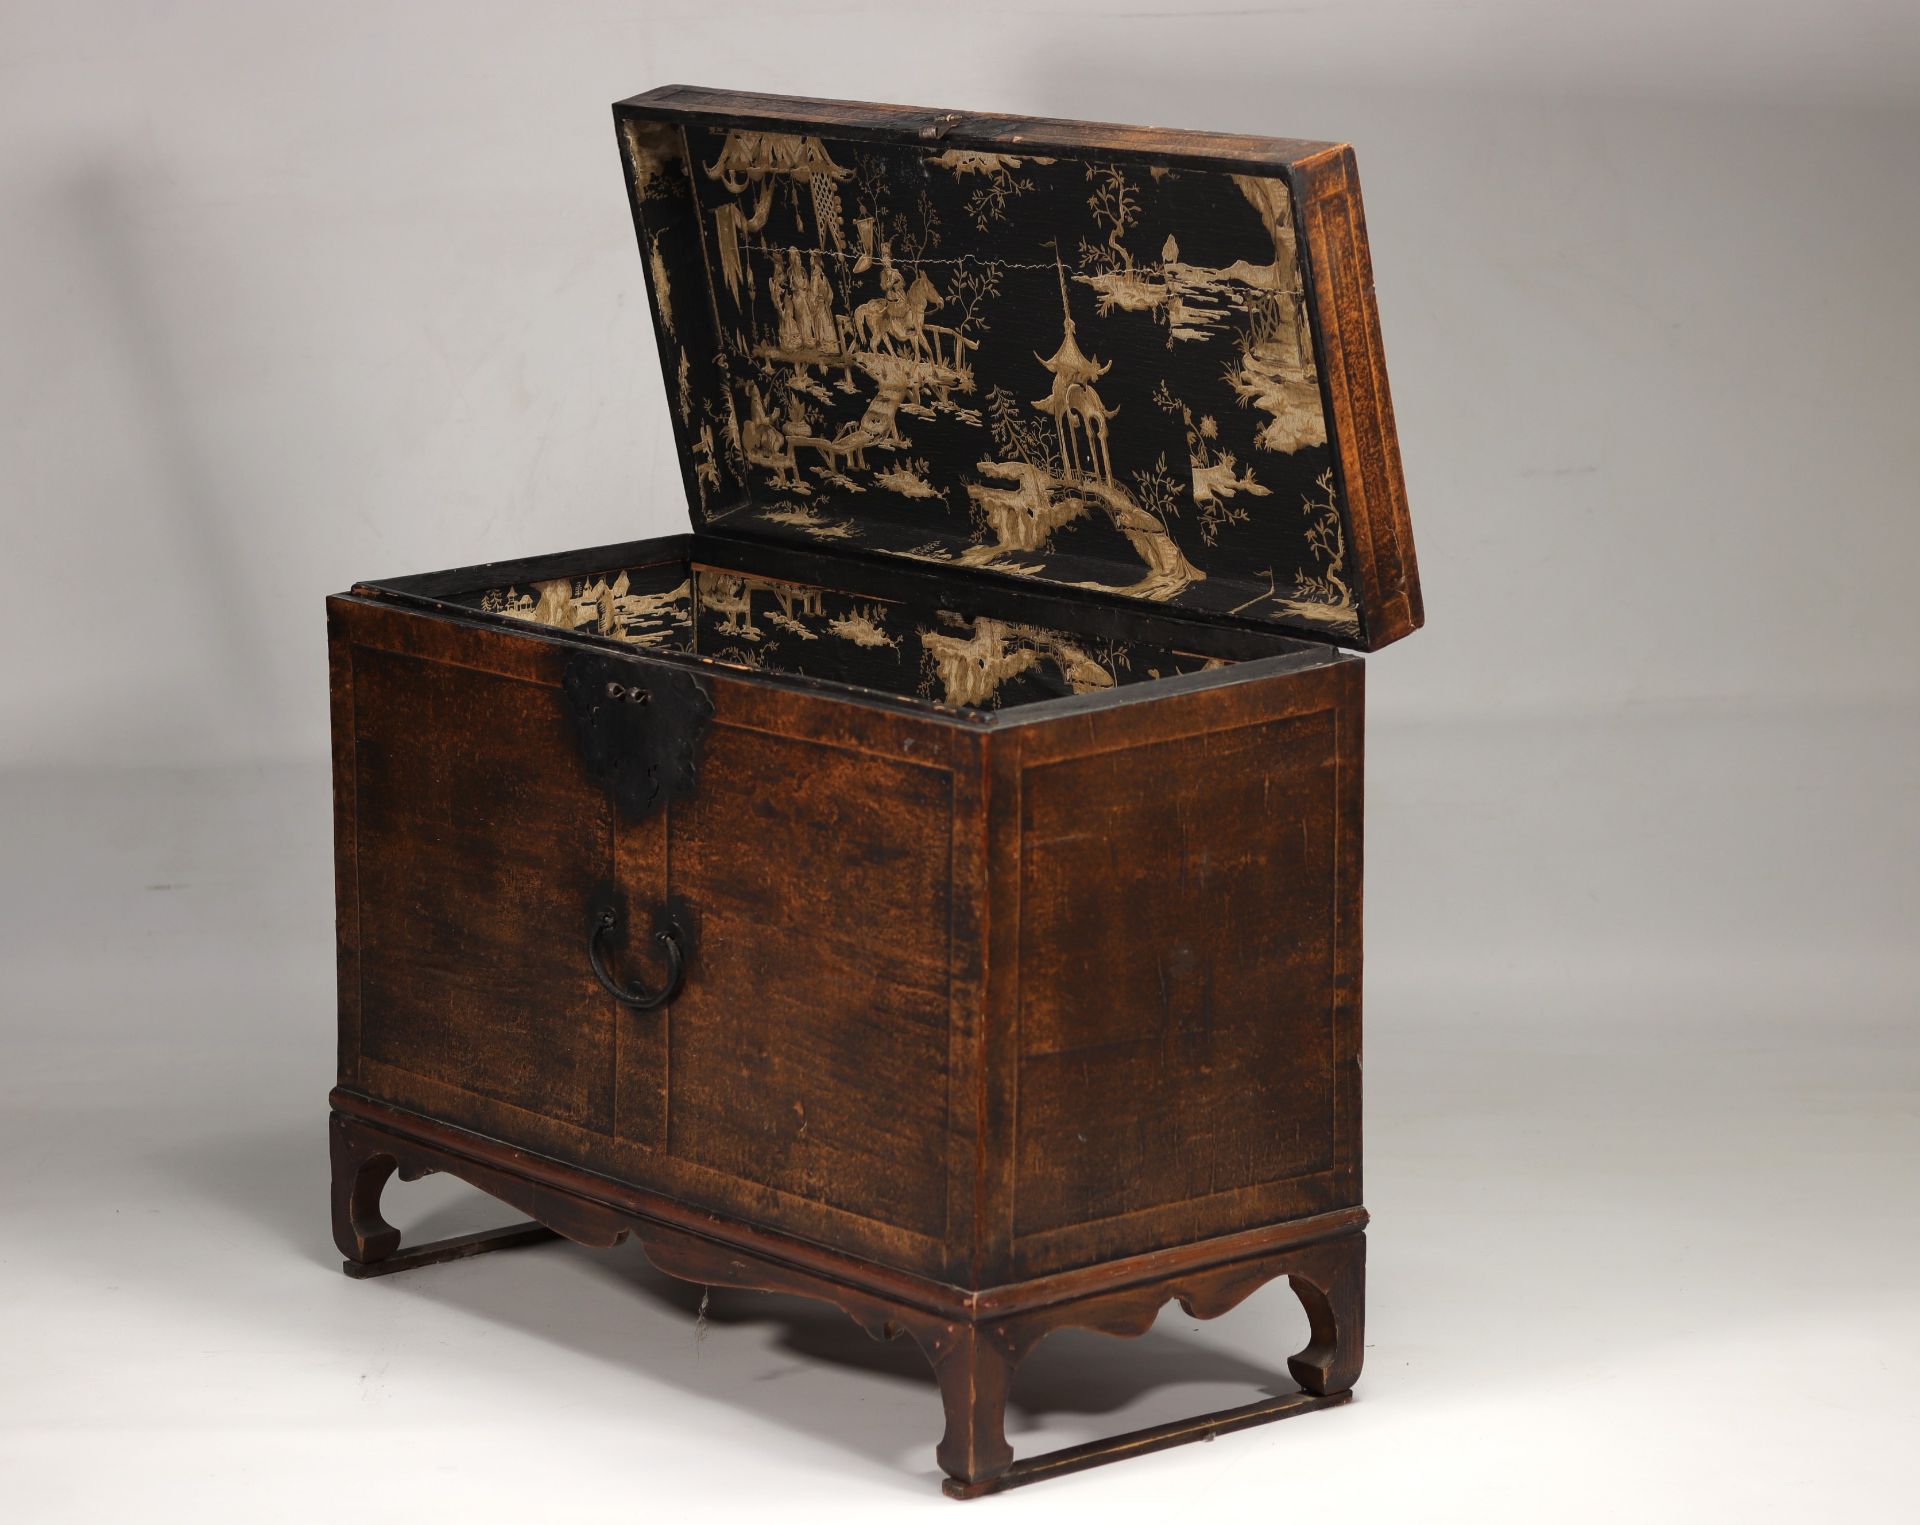 China - Wooden chest decorated with a tapestry, 19th century. - Image 3 of 3